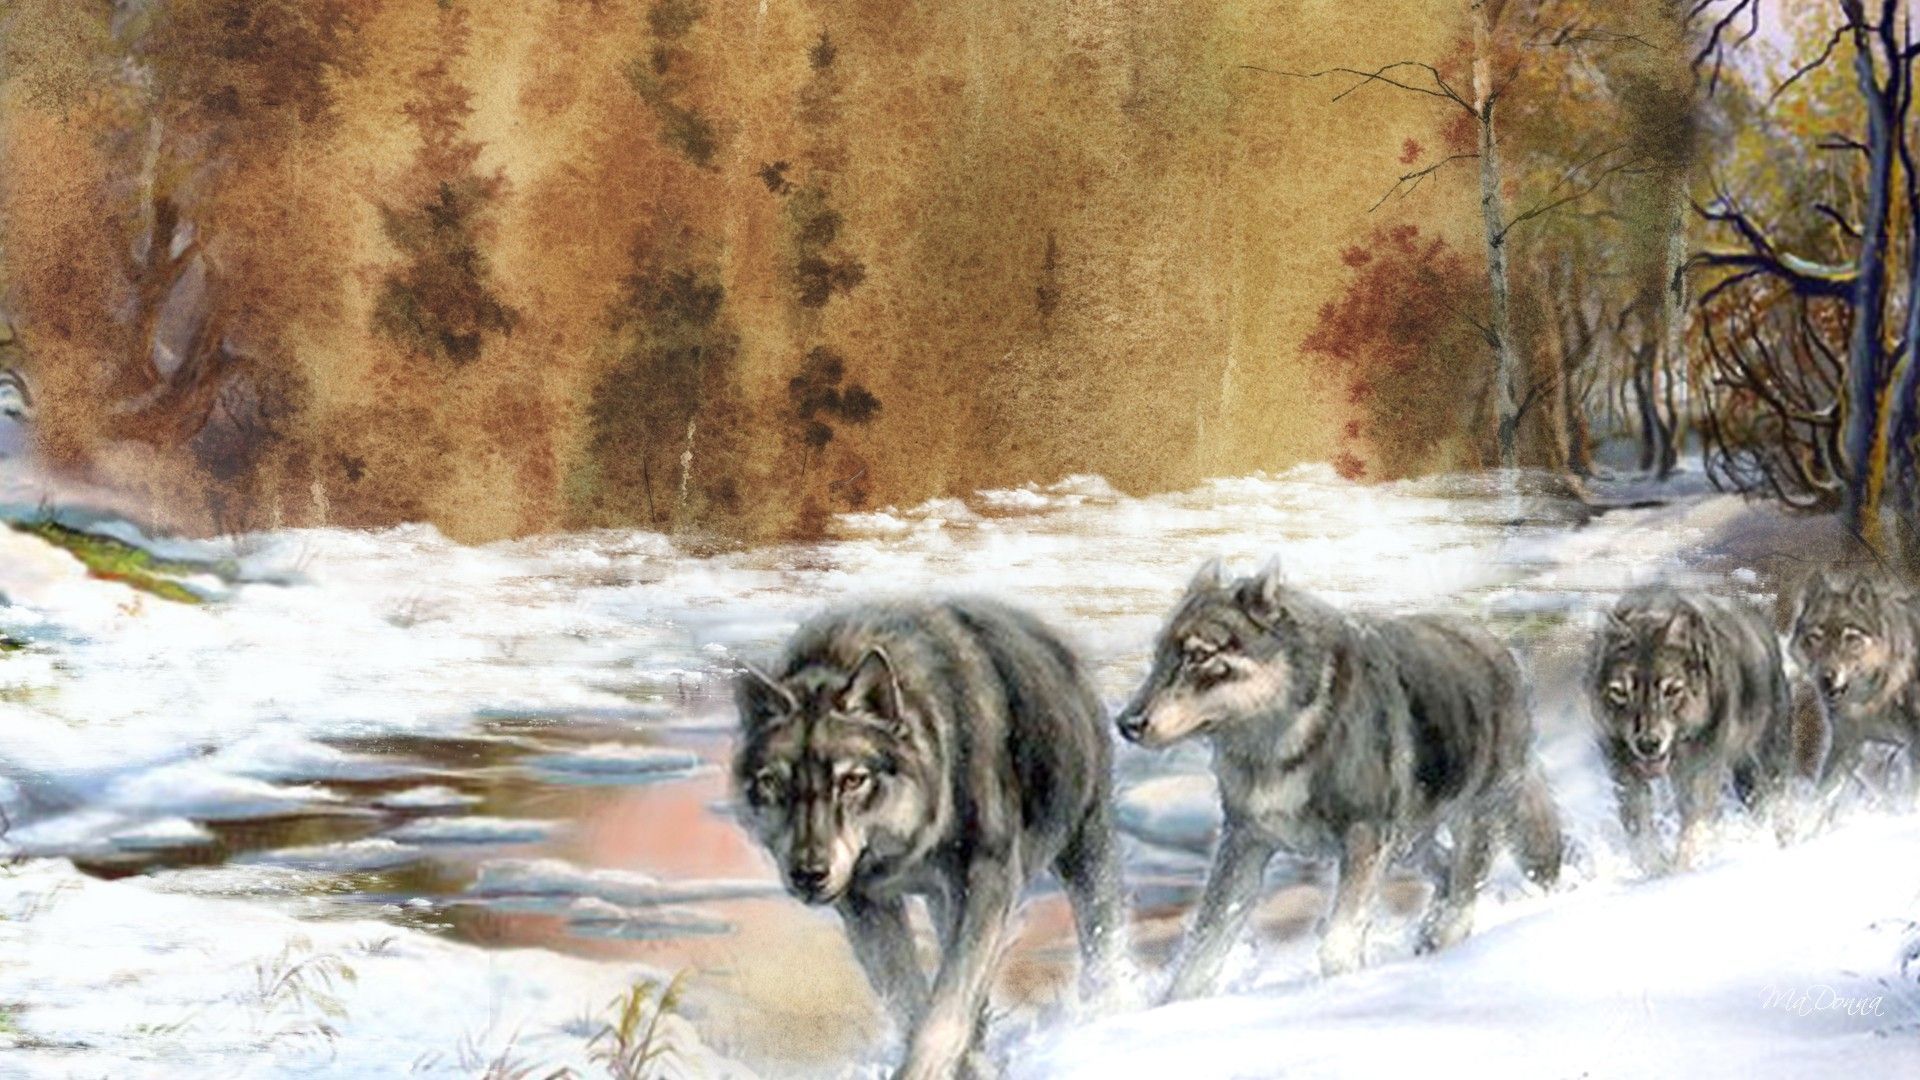 Early Winter Wolves Autumn Painting Trees Fall Creek Forest Snow River Wolf Pack Wolves2 Dogs Desktop Wallpaper. Autumn painting, Fall wallpaper, Winter wolves